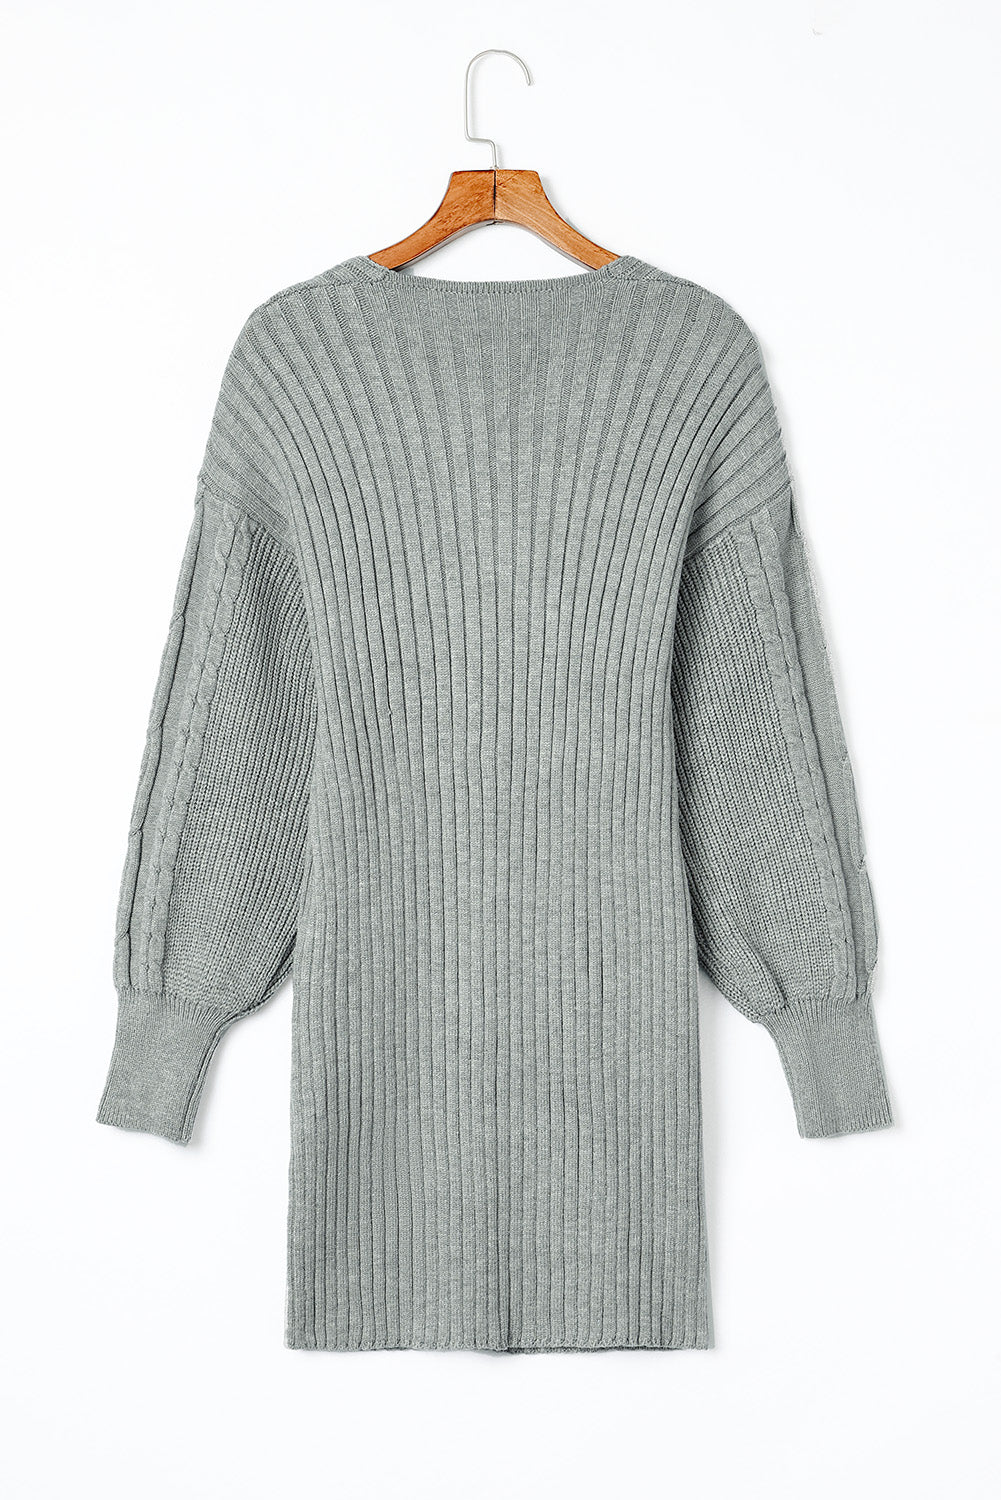 Gray Cable Ribbed Knit V Neck Bodycon Sweater Dress Blue Zone Planet